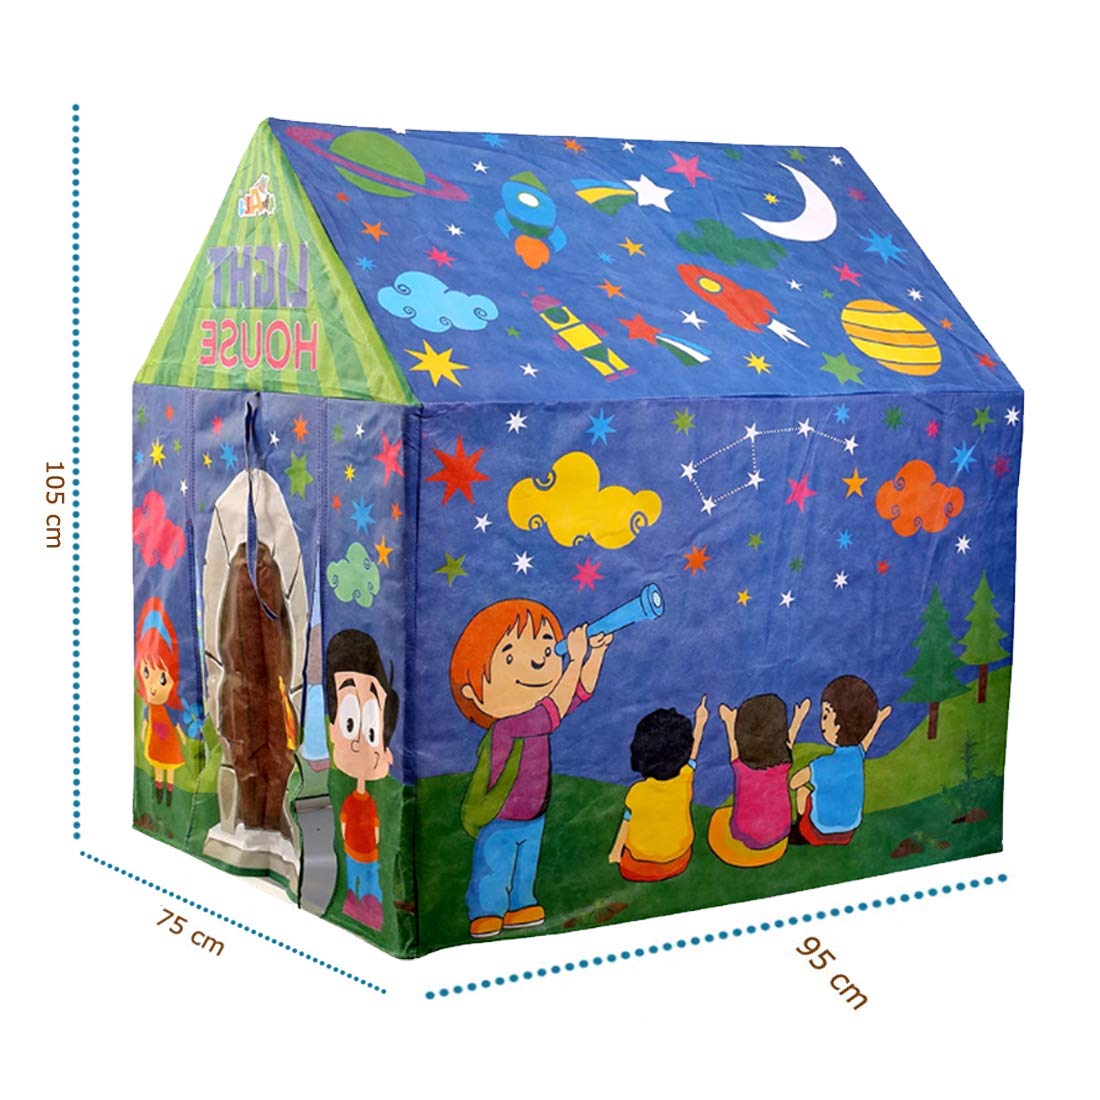 Awlas Play Tent House With LED Lights For Kids Indoor And Outdoor Play Toys - Multicolor